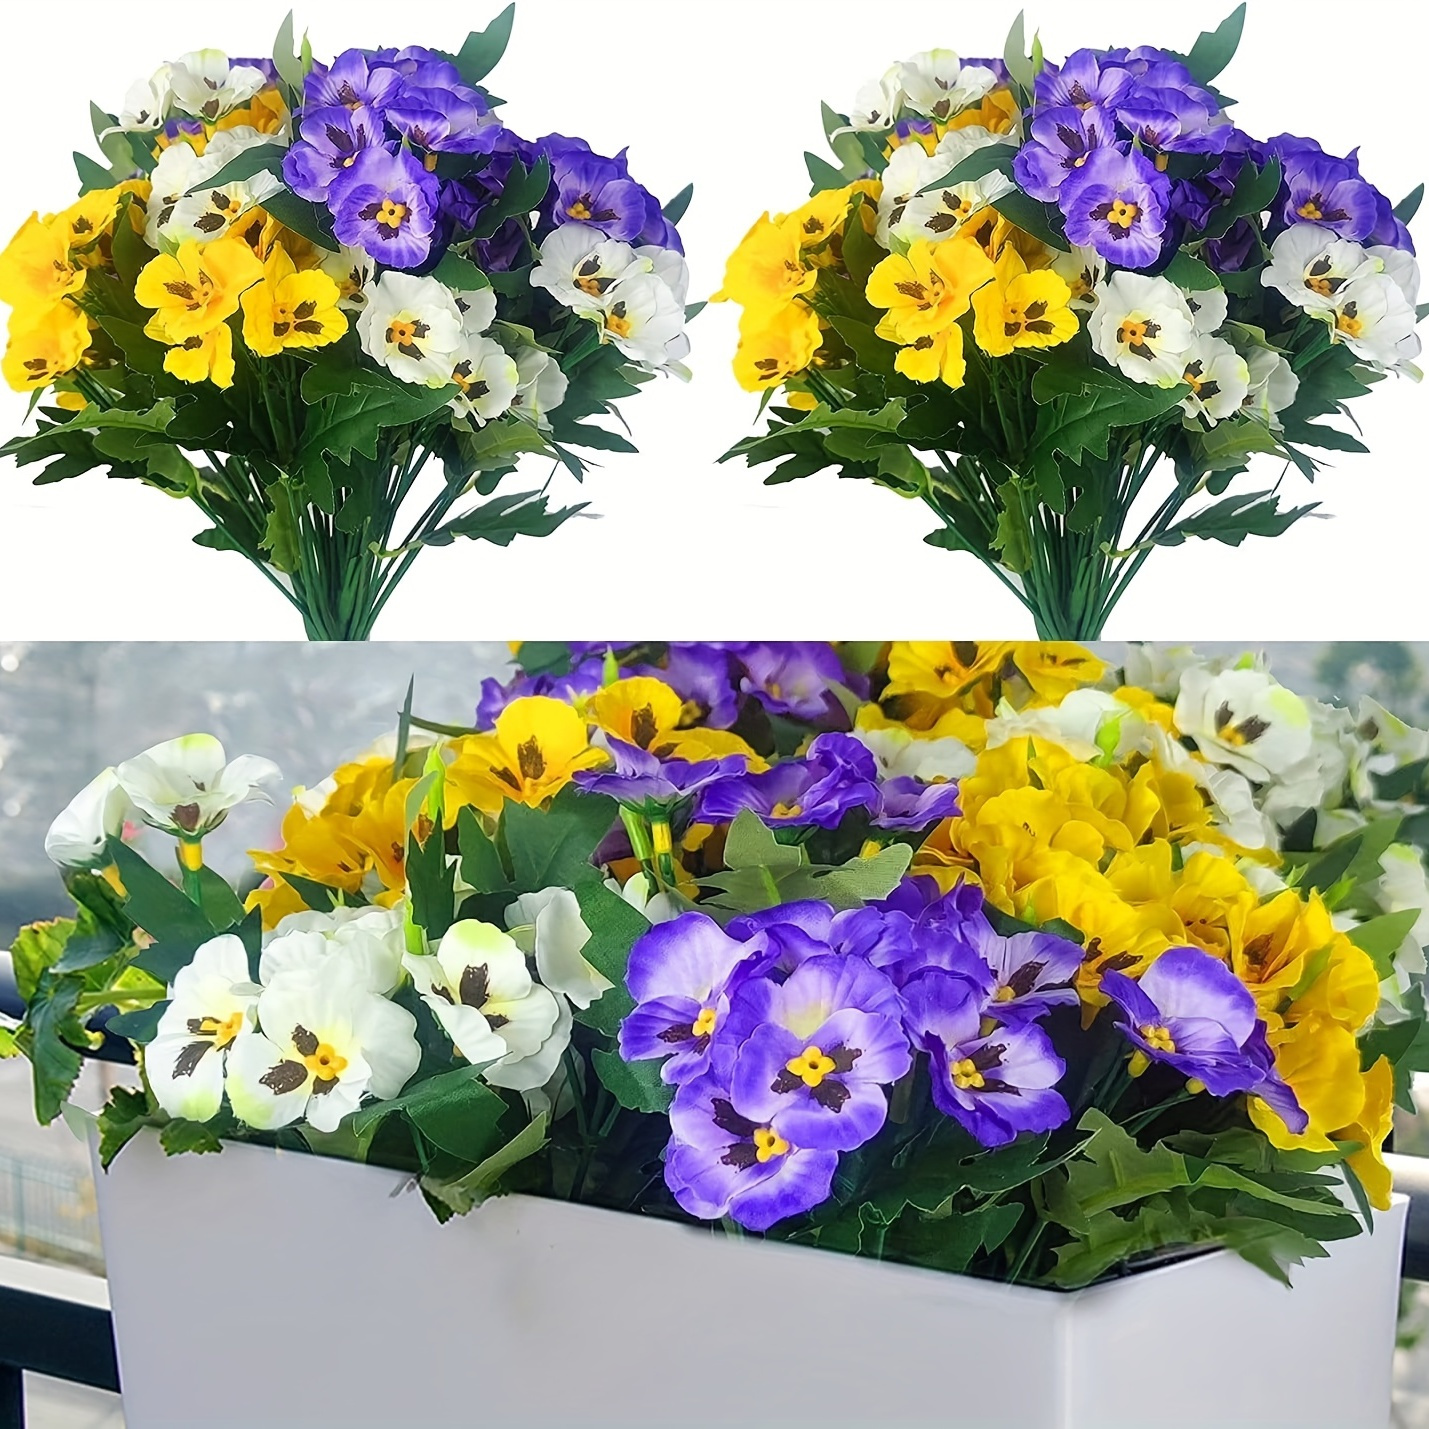 

Faux Purple Pansy And Daisy Flowers - 6 Bundles For Home, Wedding, And Garden Decor